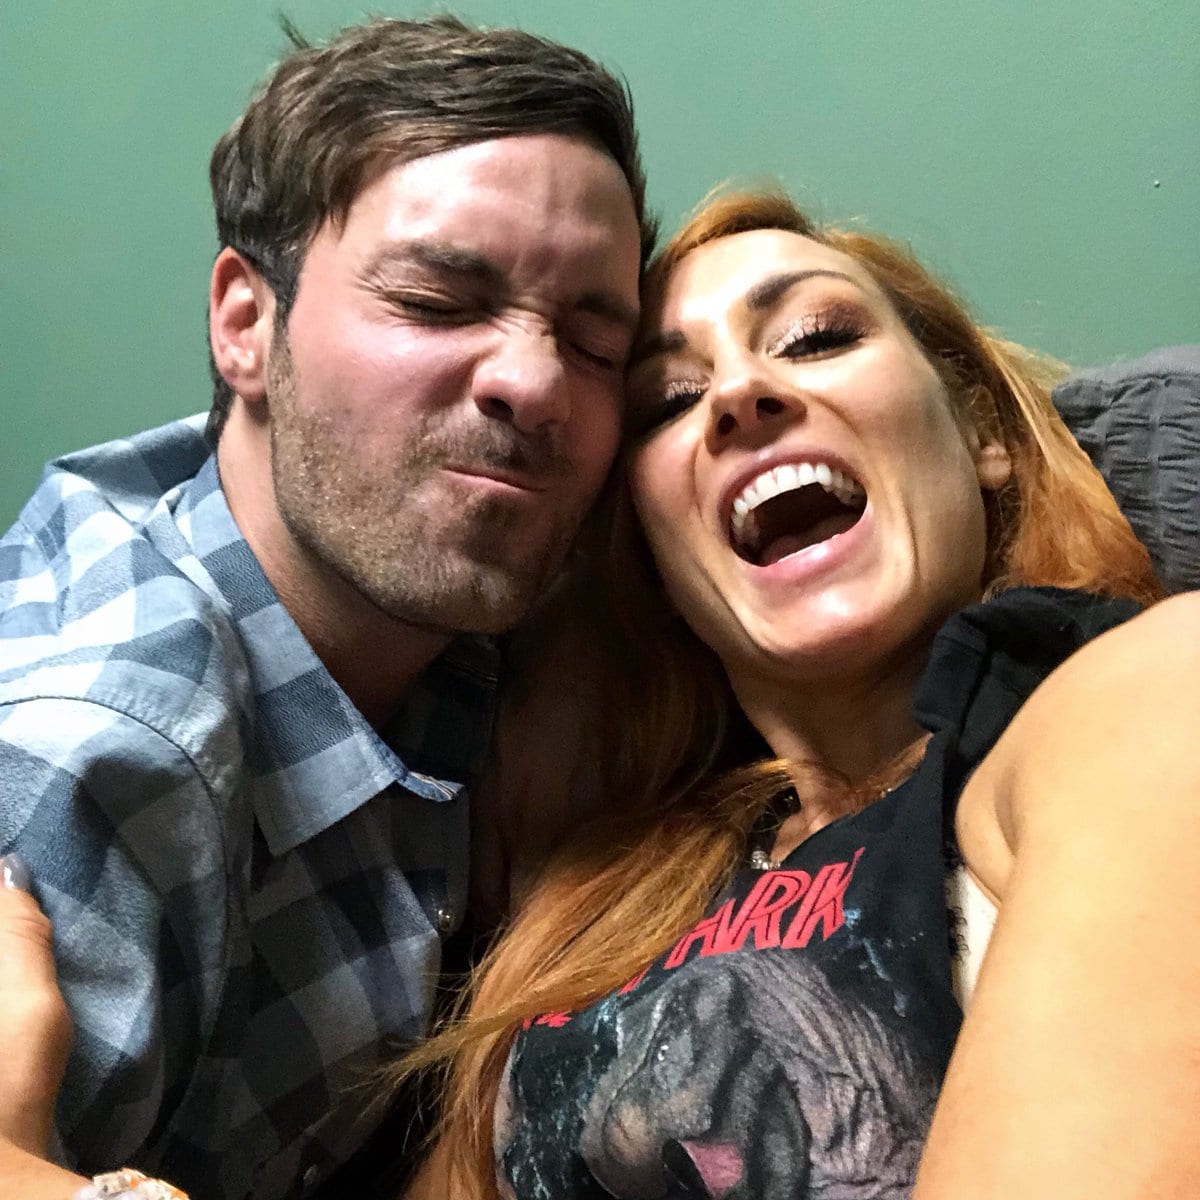 Check Out Photos of Becky Lynch With Her New Boyfriend